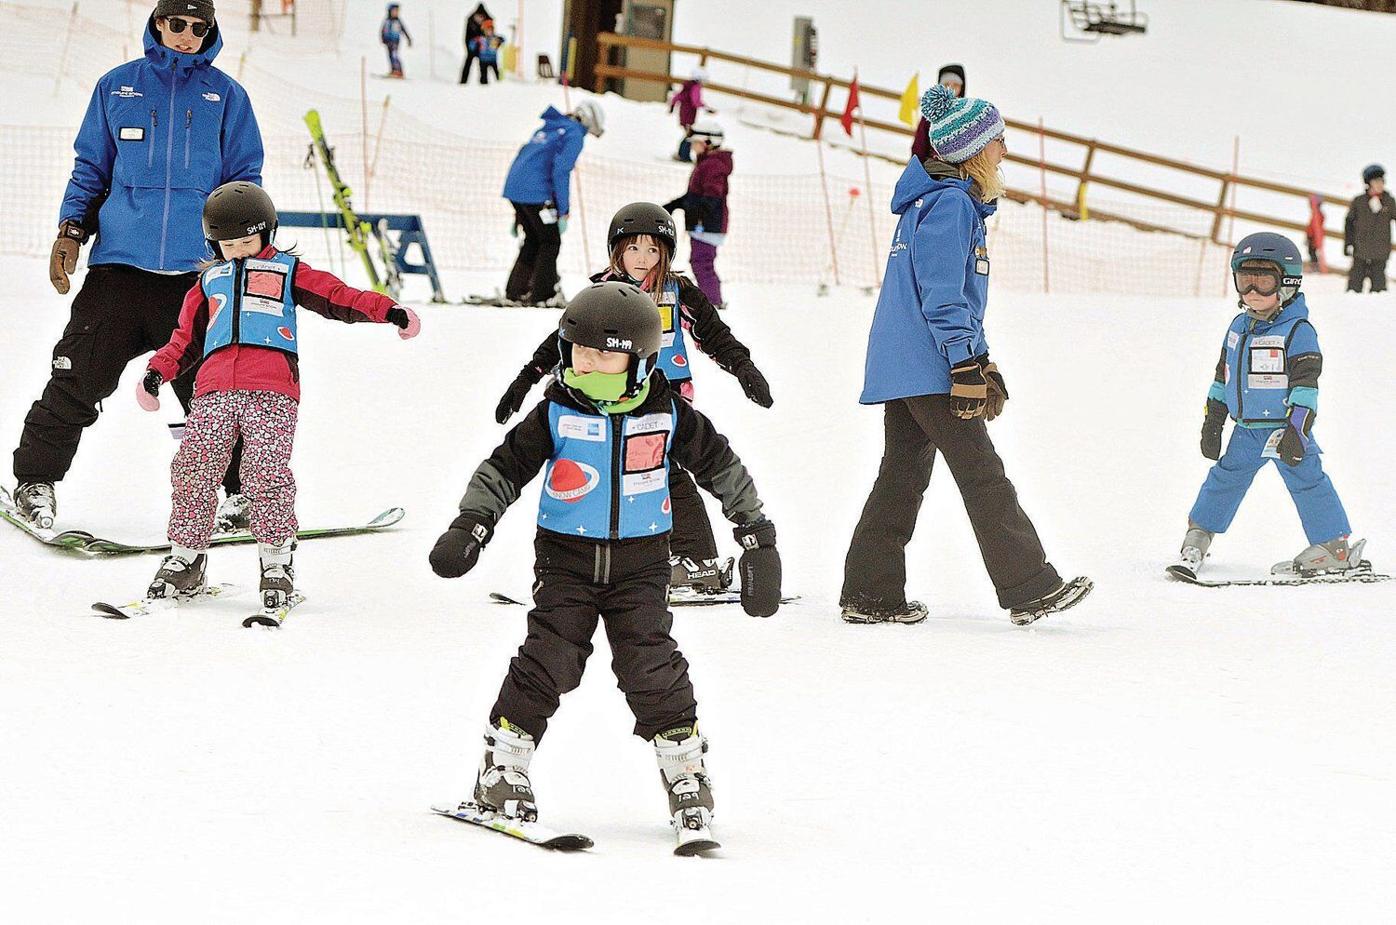 Proposal would provide COVID funds to ski areas